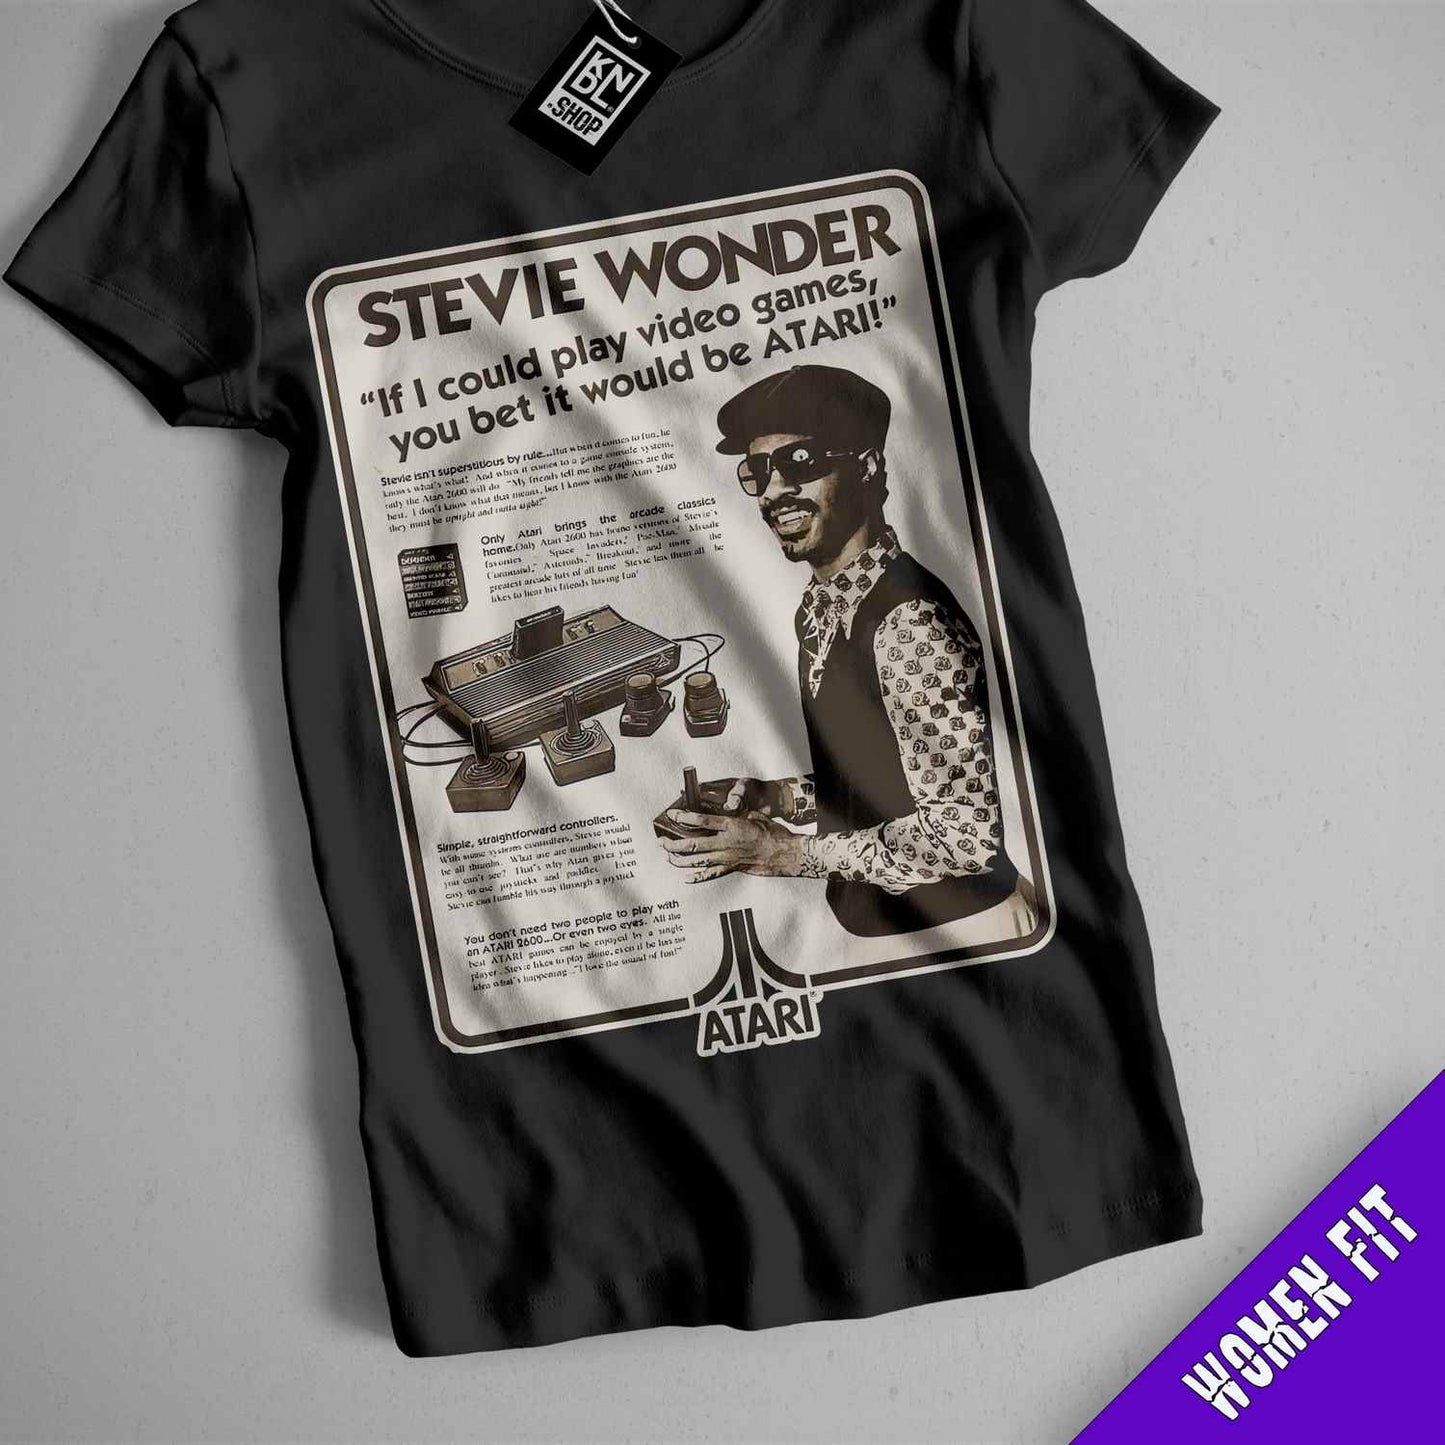 a t - shirt with a picture of steve wonder on it